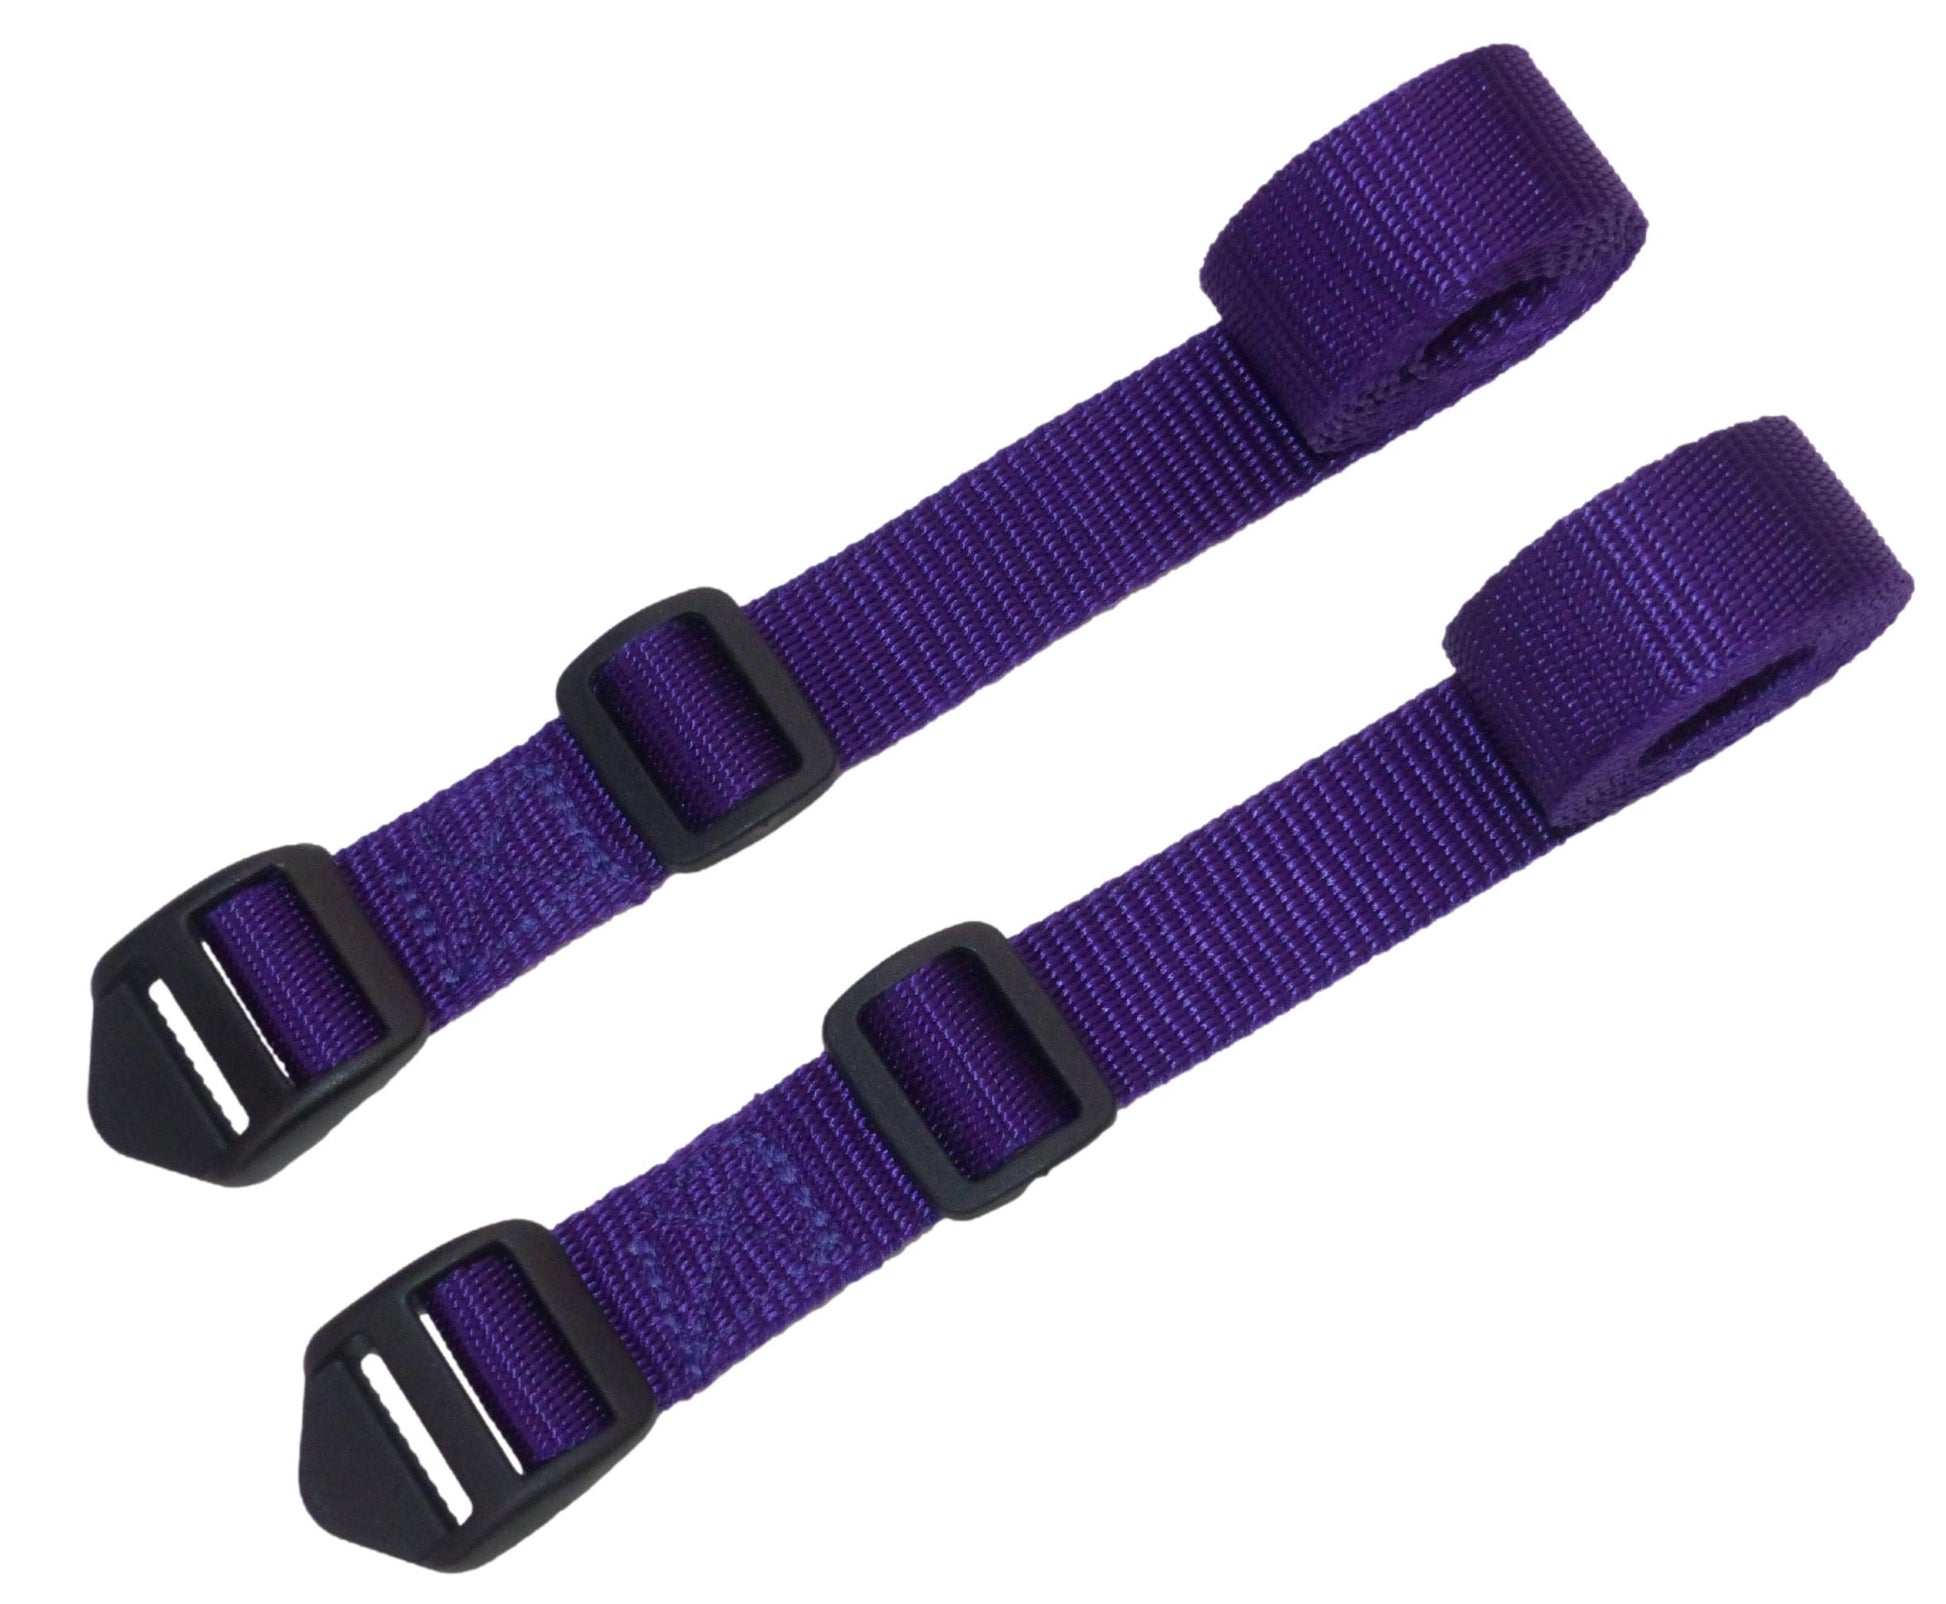 The Benristraps 25mm Camping Straps, 150cm (pair) in purple